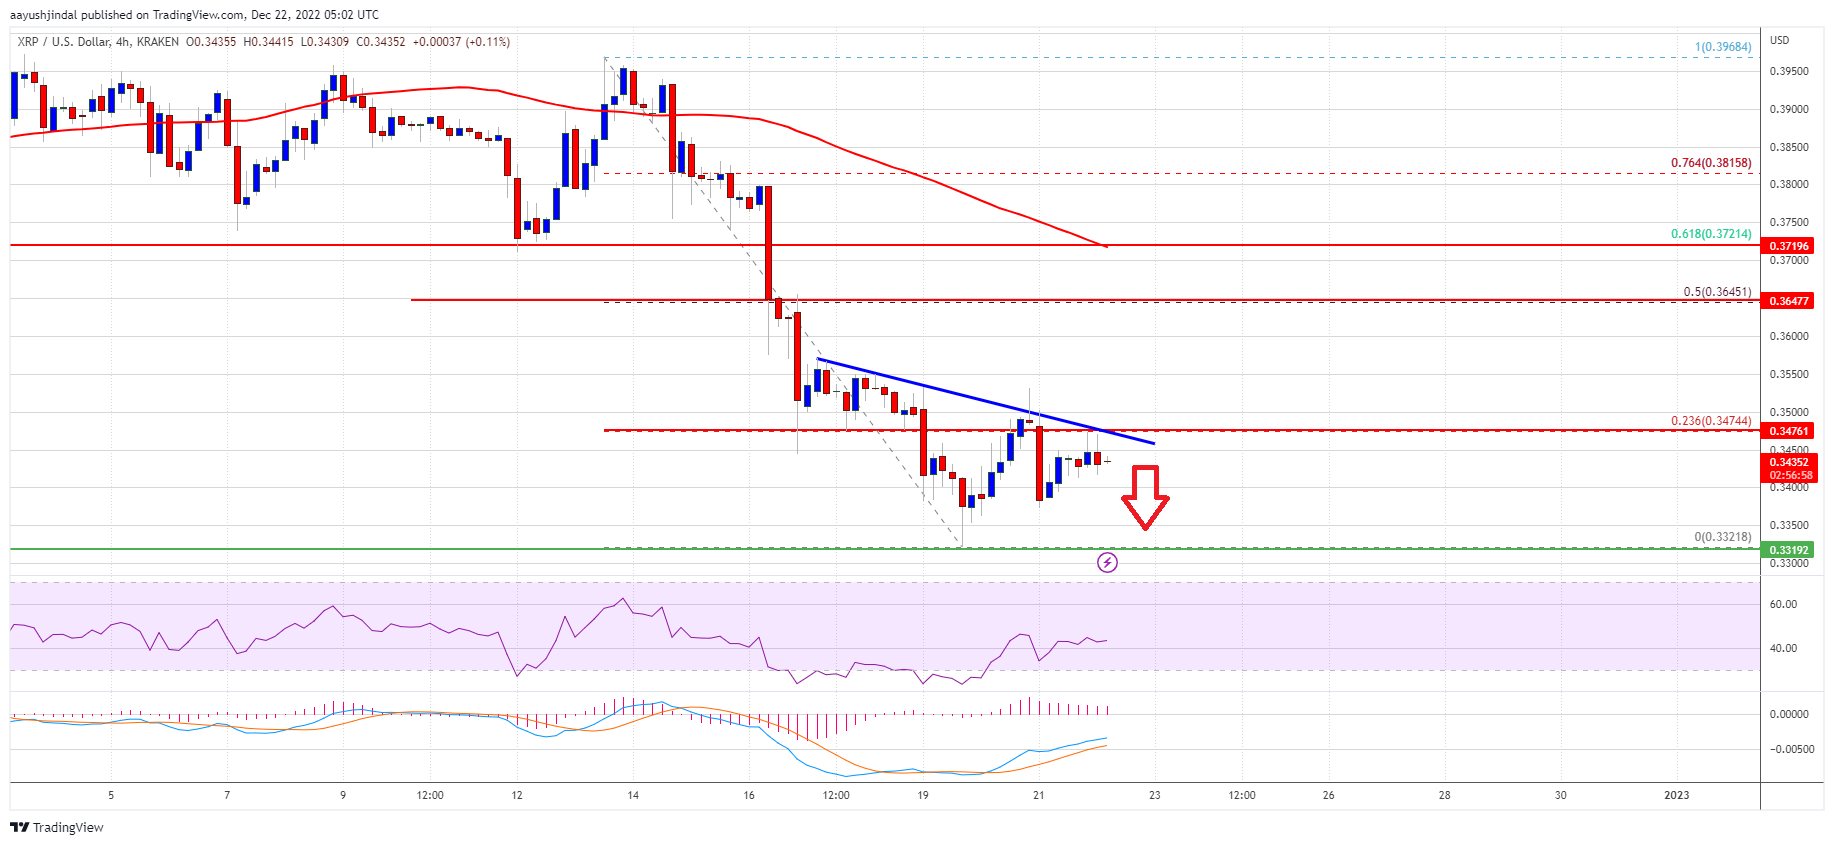 XRP Price Prediction: Bearish Continuation Below $0.33 Seems Likely